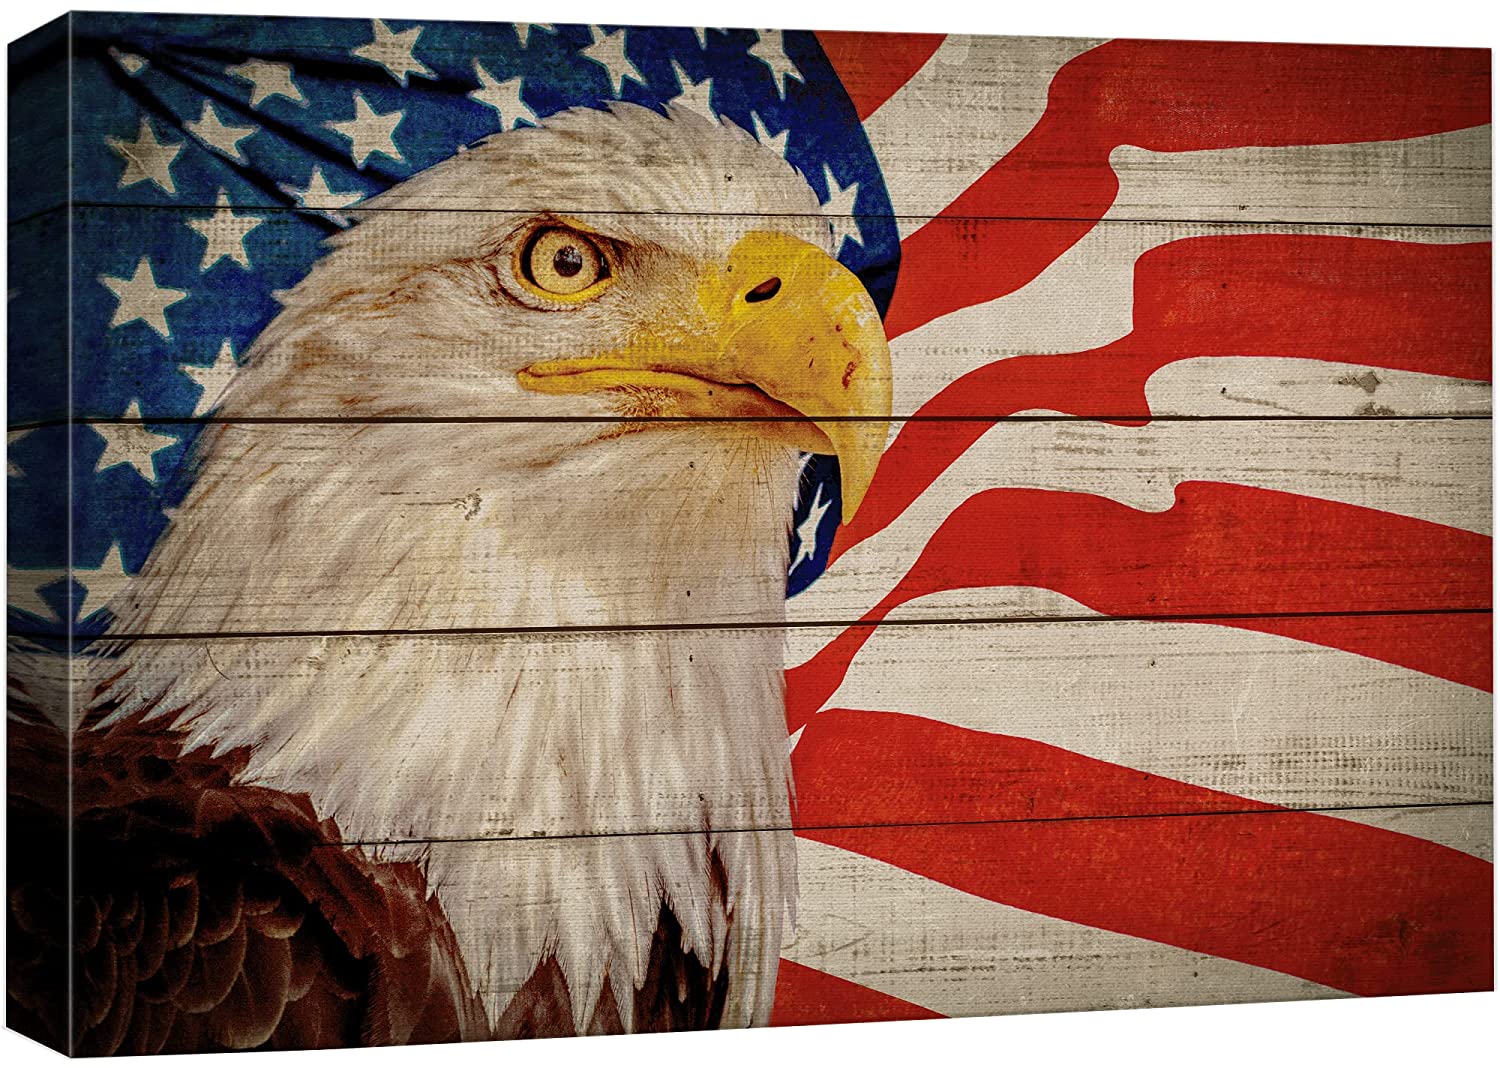 American Flag Wall Decor Golden Eagle Pictures Patriotism Artwork for Living Room Piece Prints on Canvas White Red Wall Art... [並行輸入品]